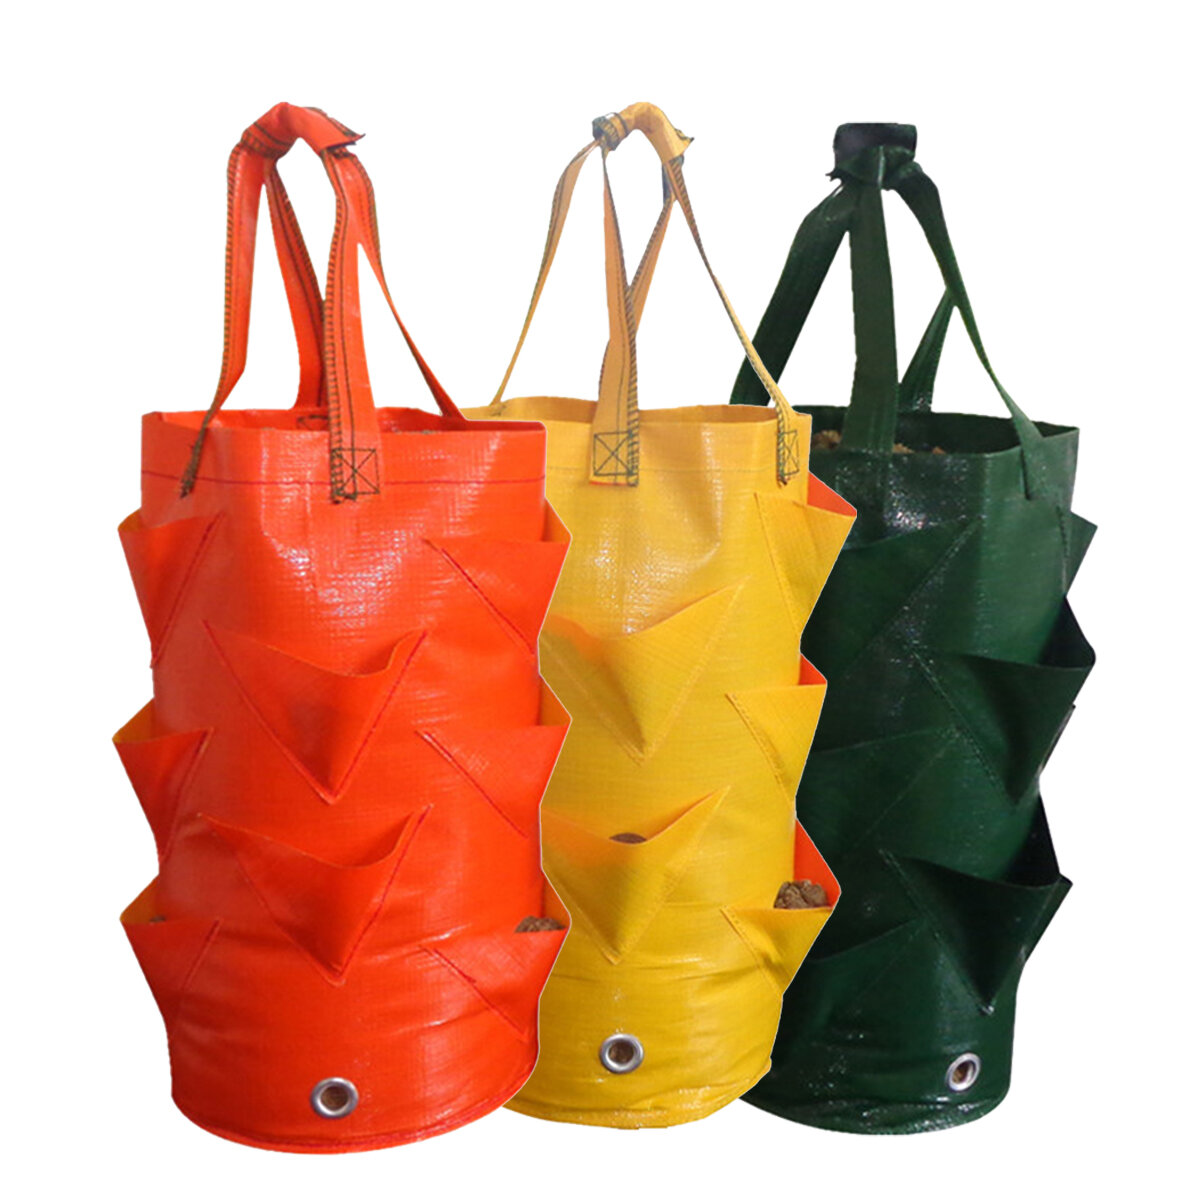 

3 Gallons Flower Hanging Planting Bag Basket Pouch Drop Herb Strawberry Planting Colorful Bag